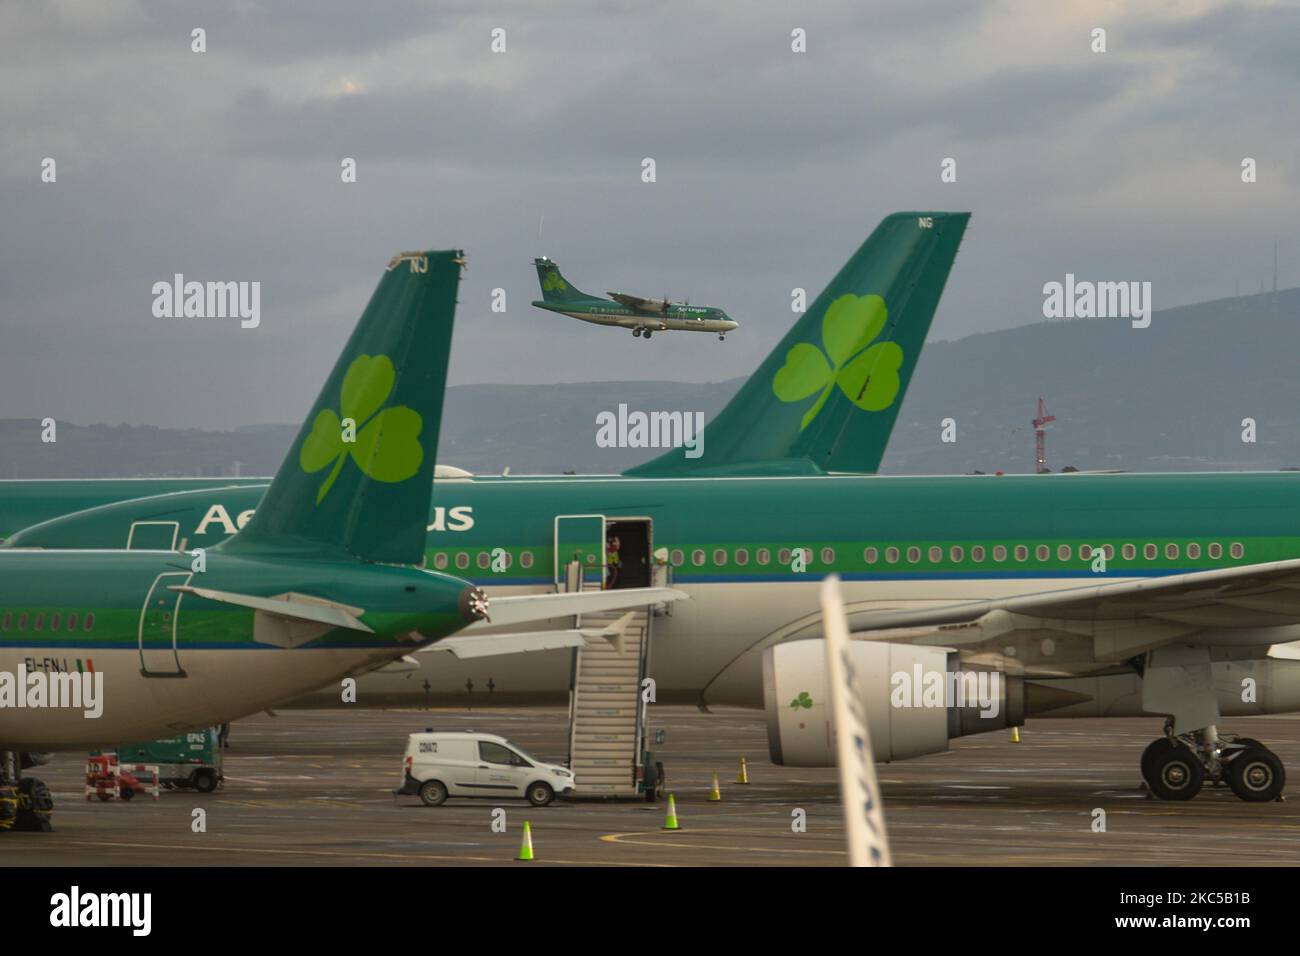 Aer Lingus planes seen at Dublin Airport, during the coronavirus lockdown level 3. The pandemic has had a 'devastating' impact on the operator of Dublin airport. DAA's losses at the beginning of September 2020 were approaching €150 million - according to its chief executive Dalton Philips. Many airports across the EU are now under intense financial pressure due to the slump in passenger numbers because of the Covid pandemic. On Saturday, December 05, 2020, in Dublin Airport Dublin, Ireland. (Photo by Artur Widak/NurPhoto) Stock Photo